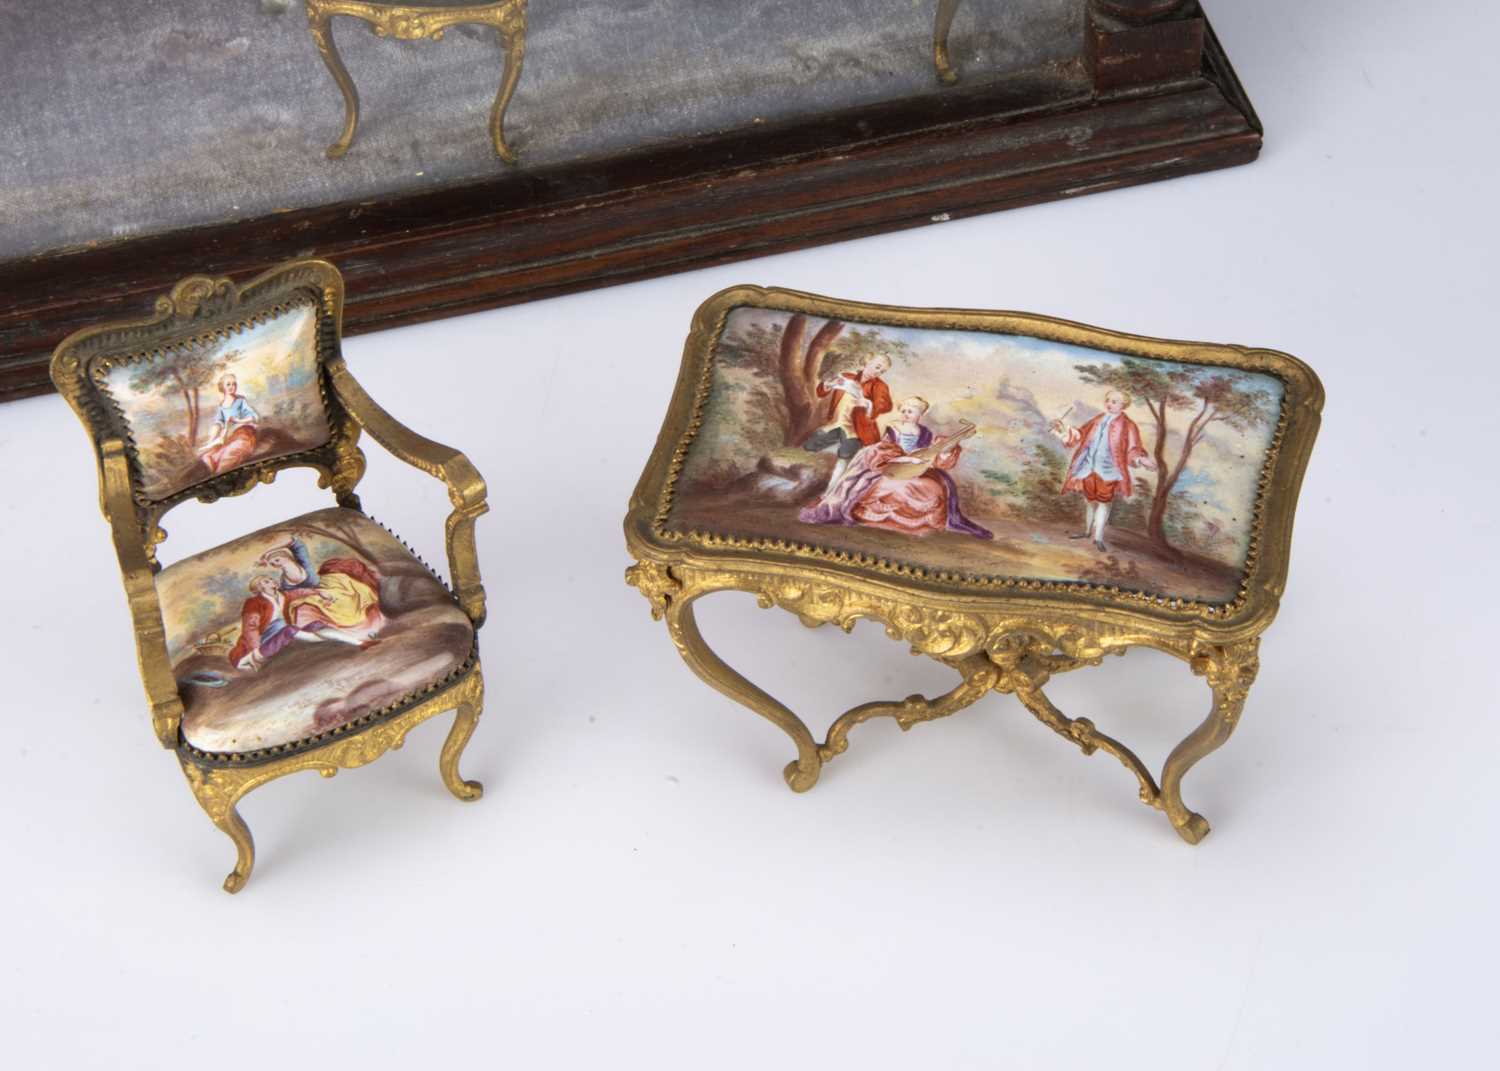 A set of early 20th century Viennese enamel and gilt metal dolls’ house furniture, - Image 2 of 3